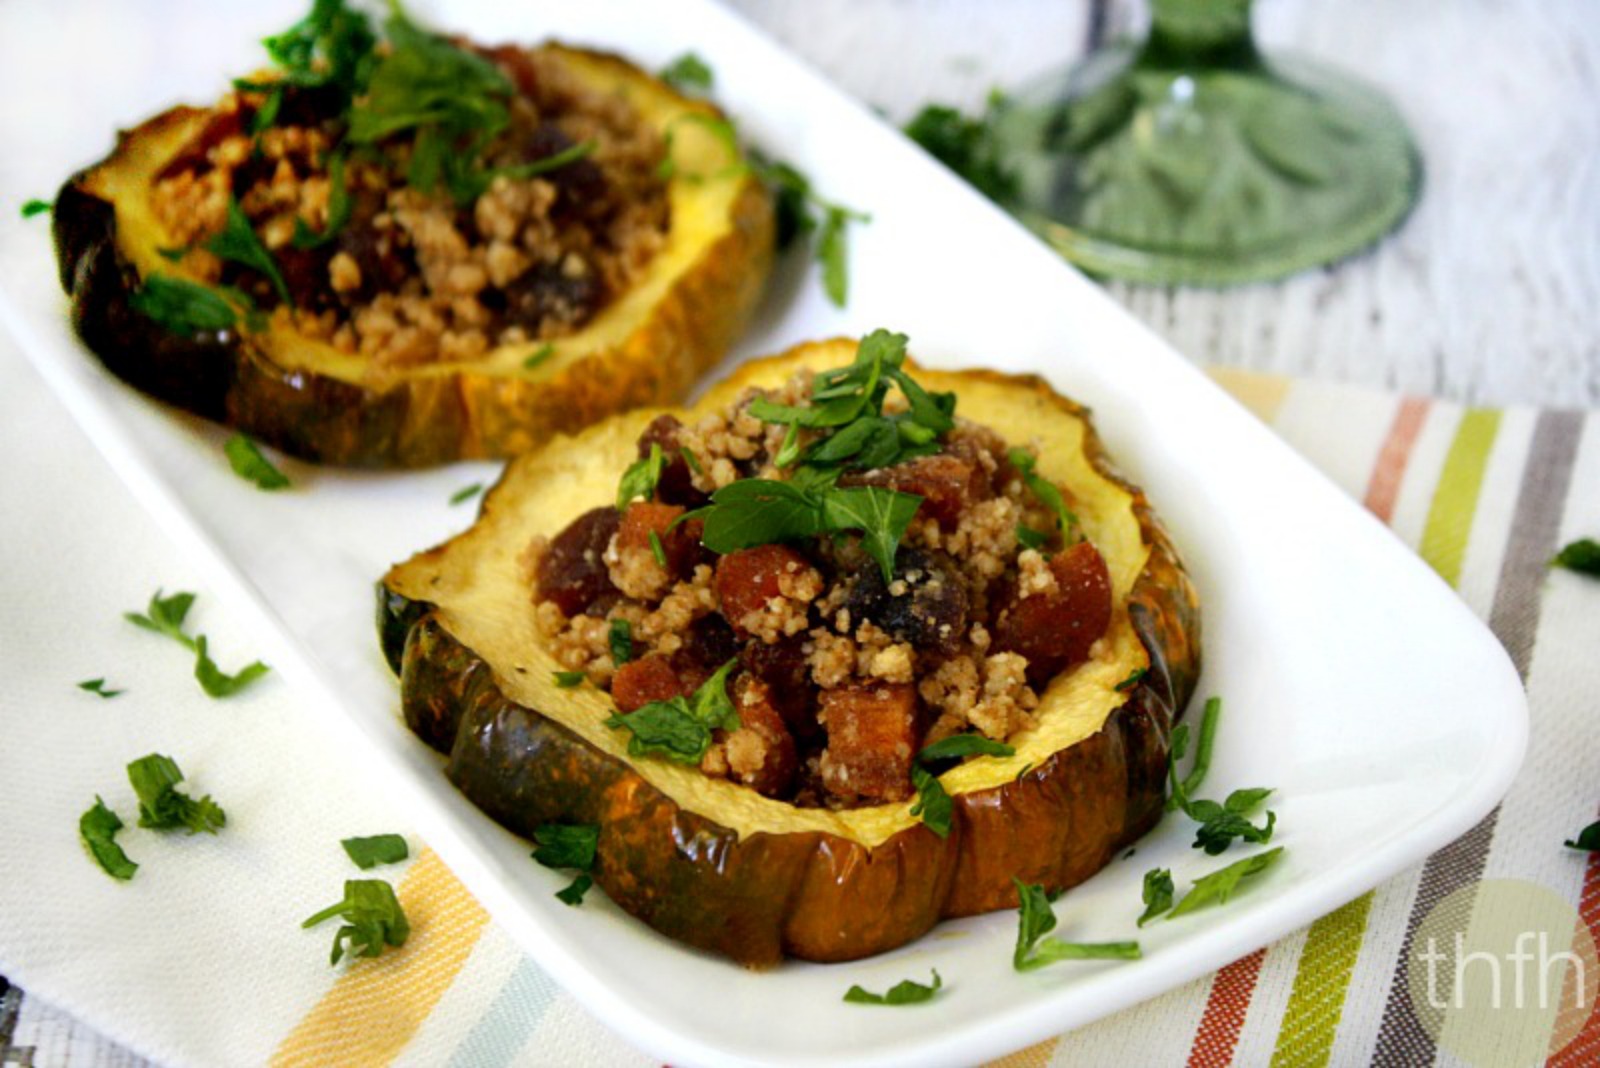 Acorn Squash Rings With Walnuts and Dried Apricots [Vegan]